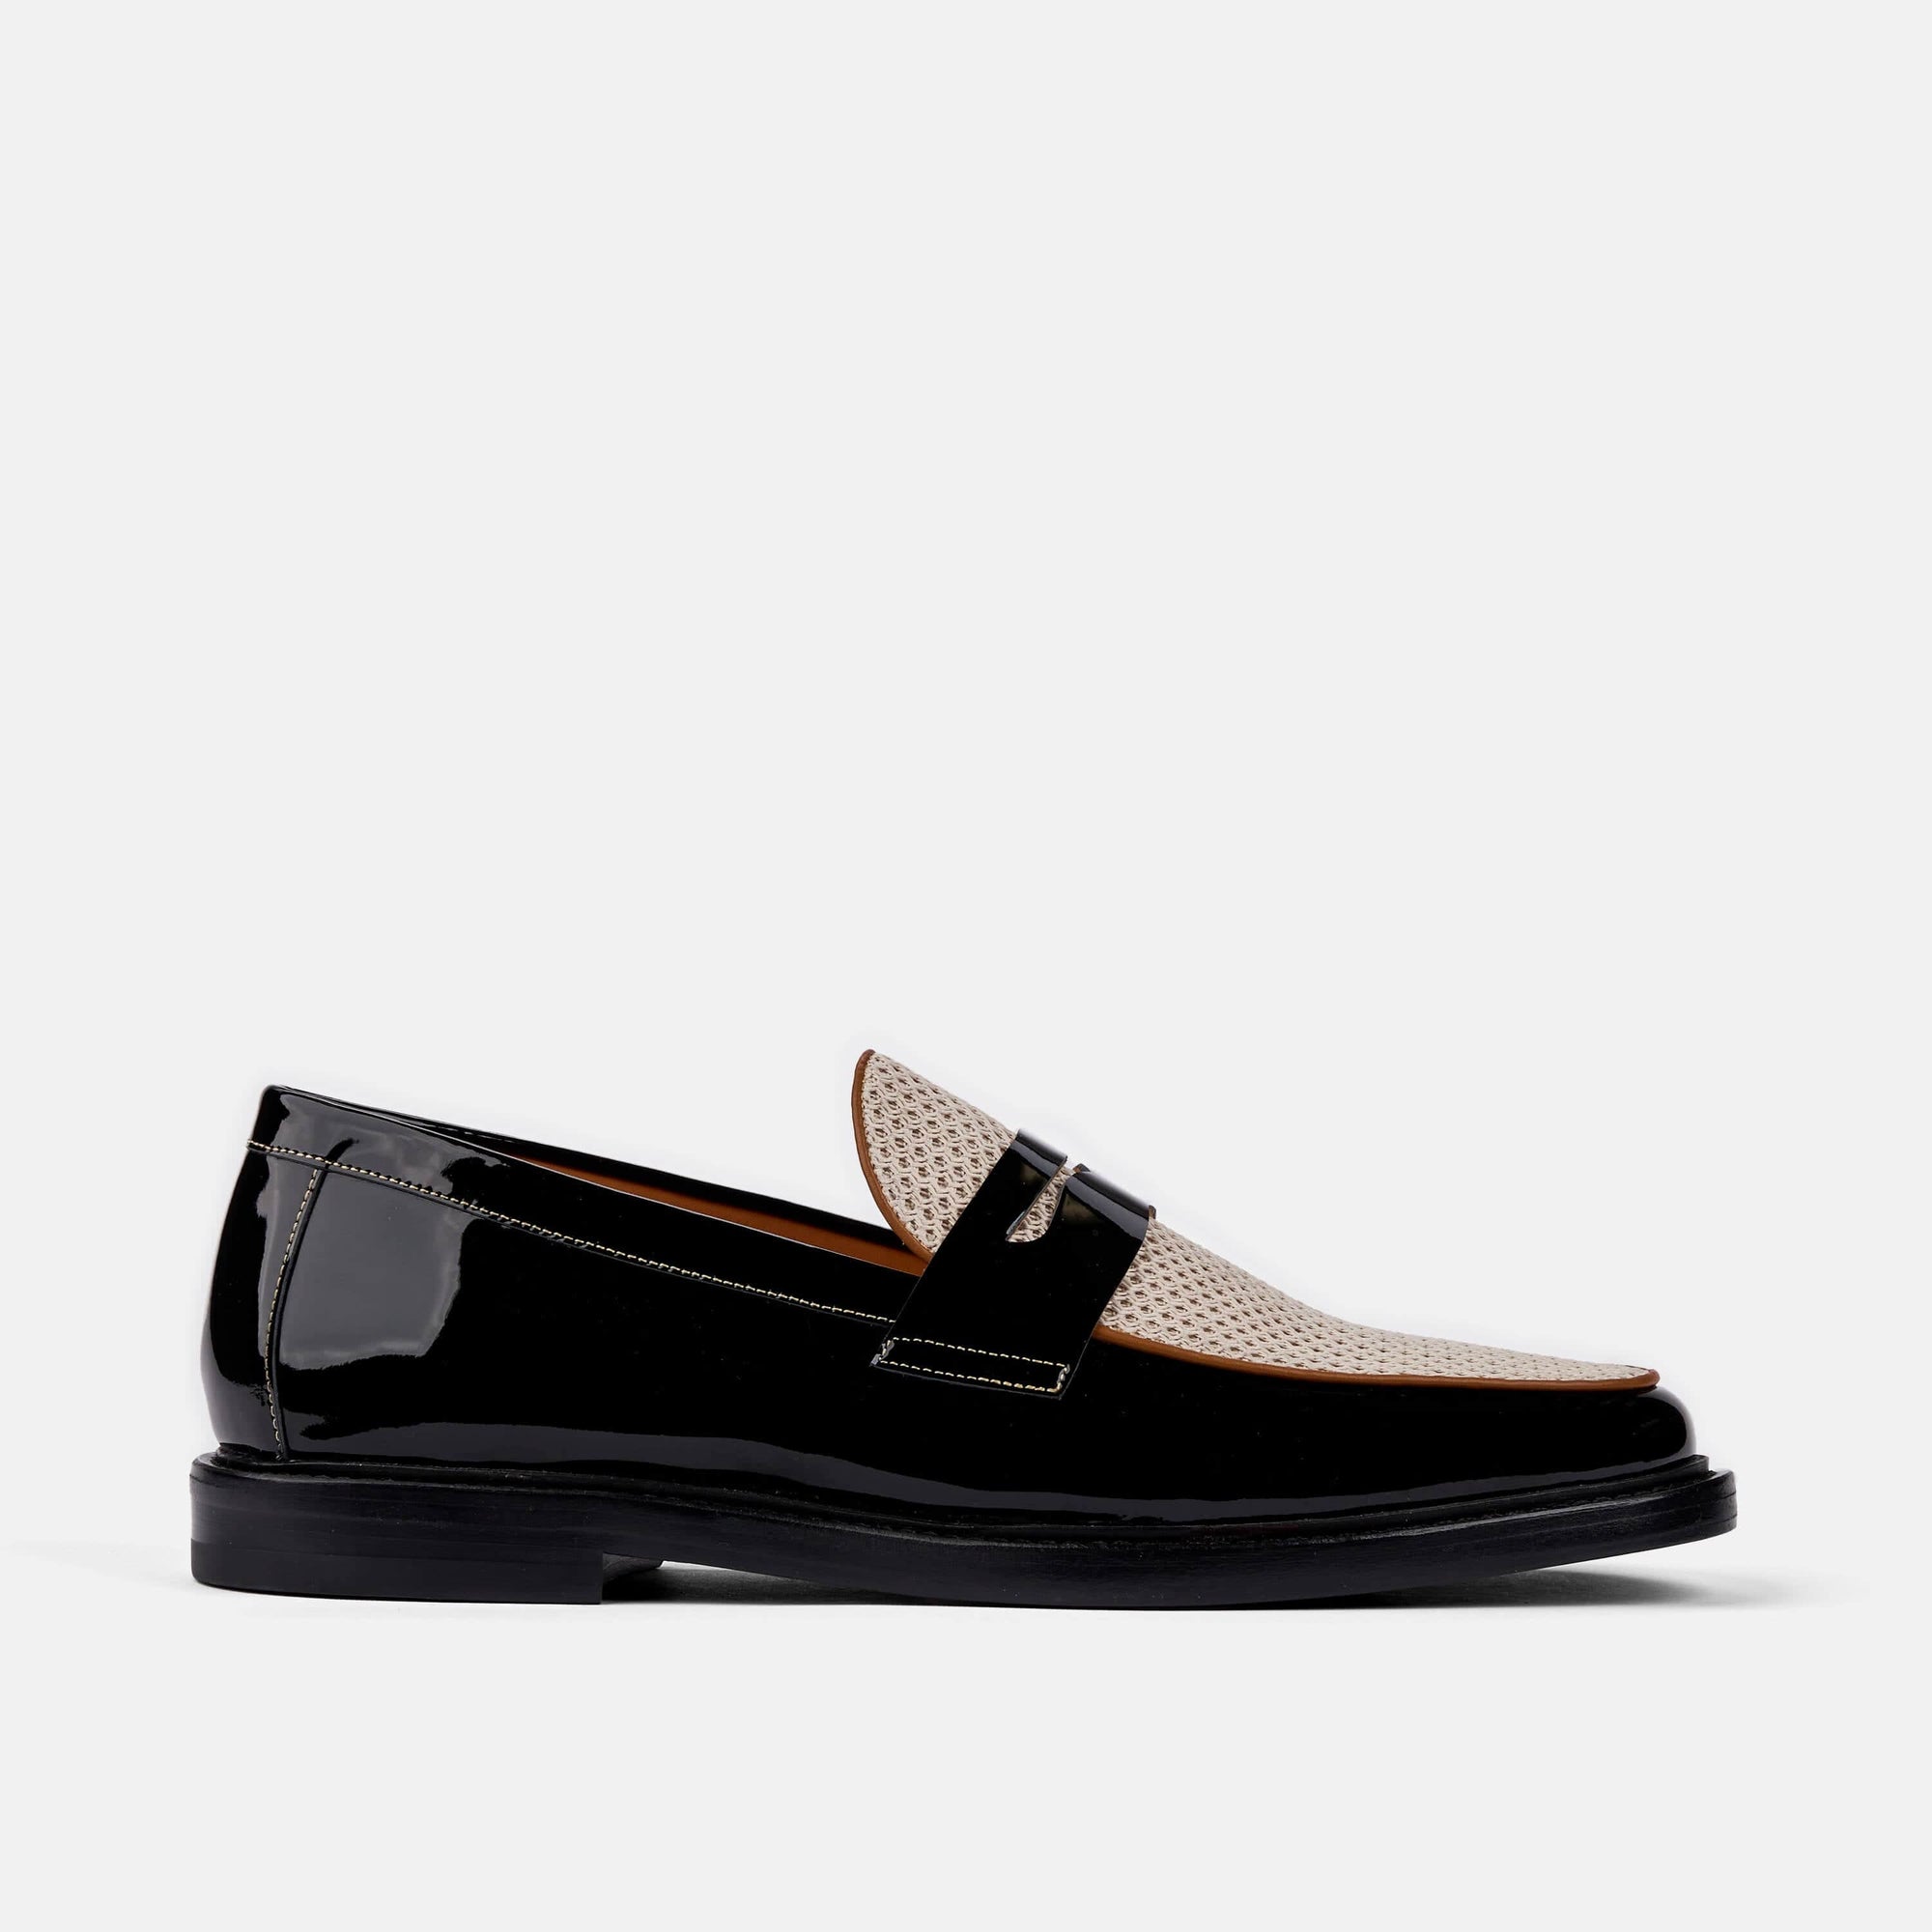 Calum Black Patent Leather Penny Loafers